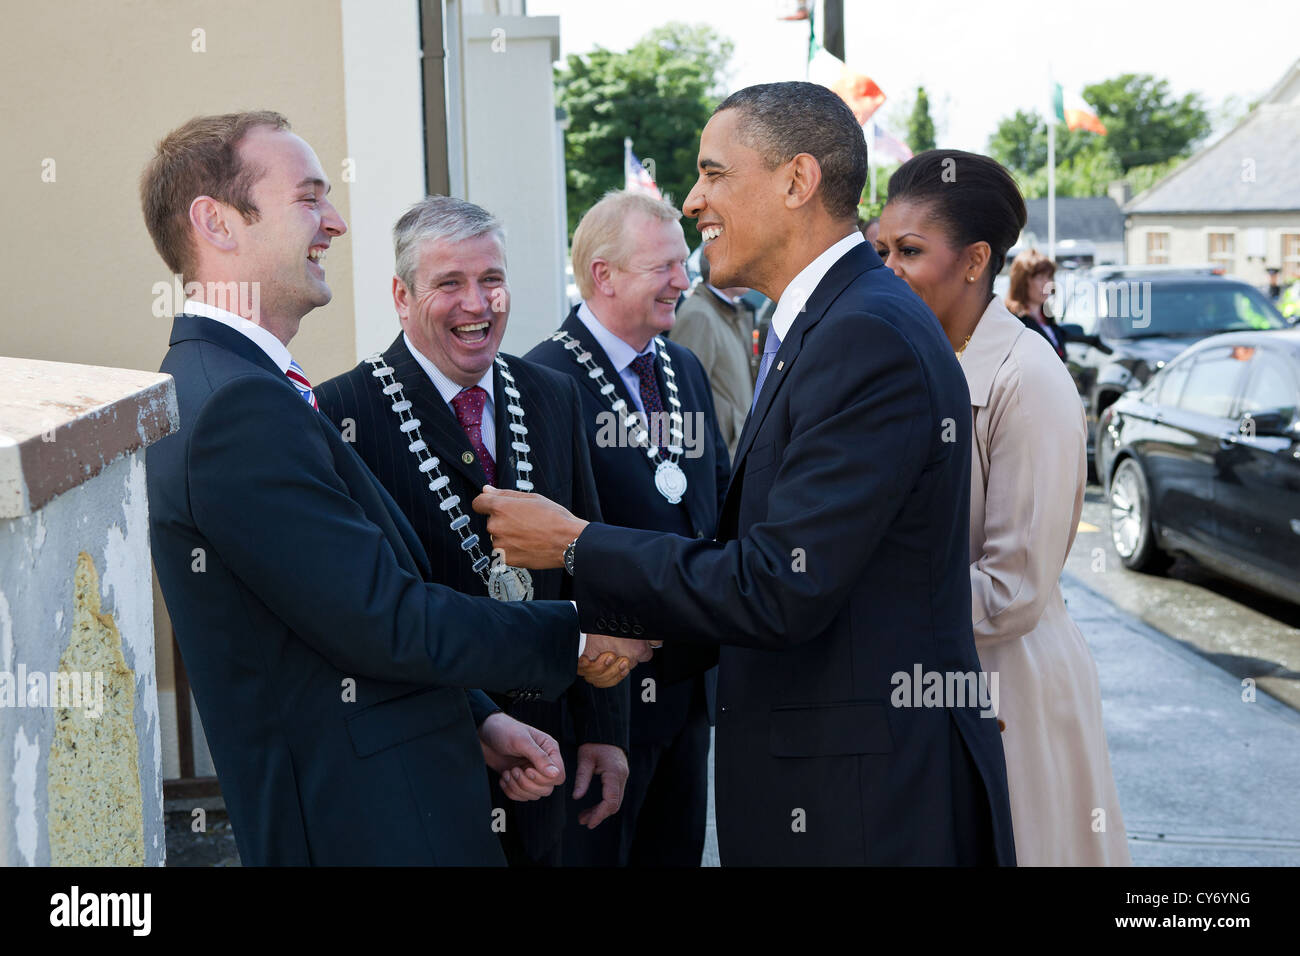 US President Barack Obama and First Lady Michelle Obama greet Henry Healy, the PresidentÕs distant cousin May 23, 2011 after arriving in Moneygall, Ireland. The President and First Lady were also welcomed by Counselor Danny Owens, Chair Offaly County, and Counselor John Kennedy, Chair Tipperary County. Stock Photo